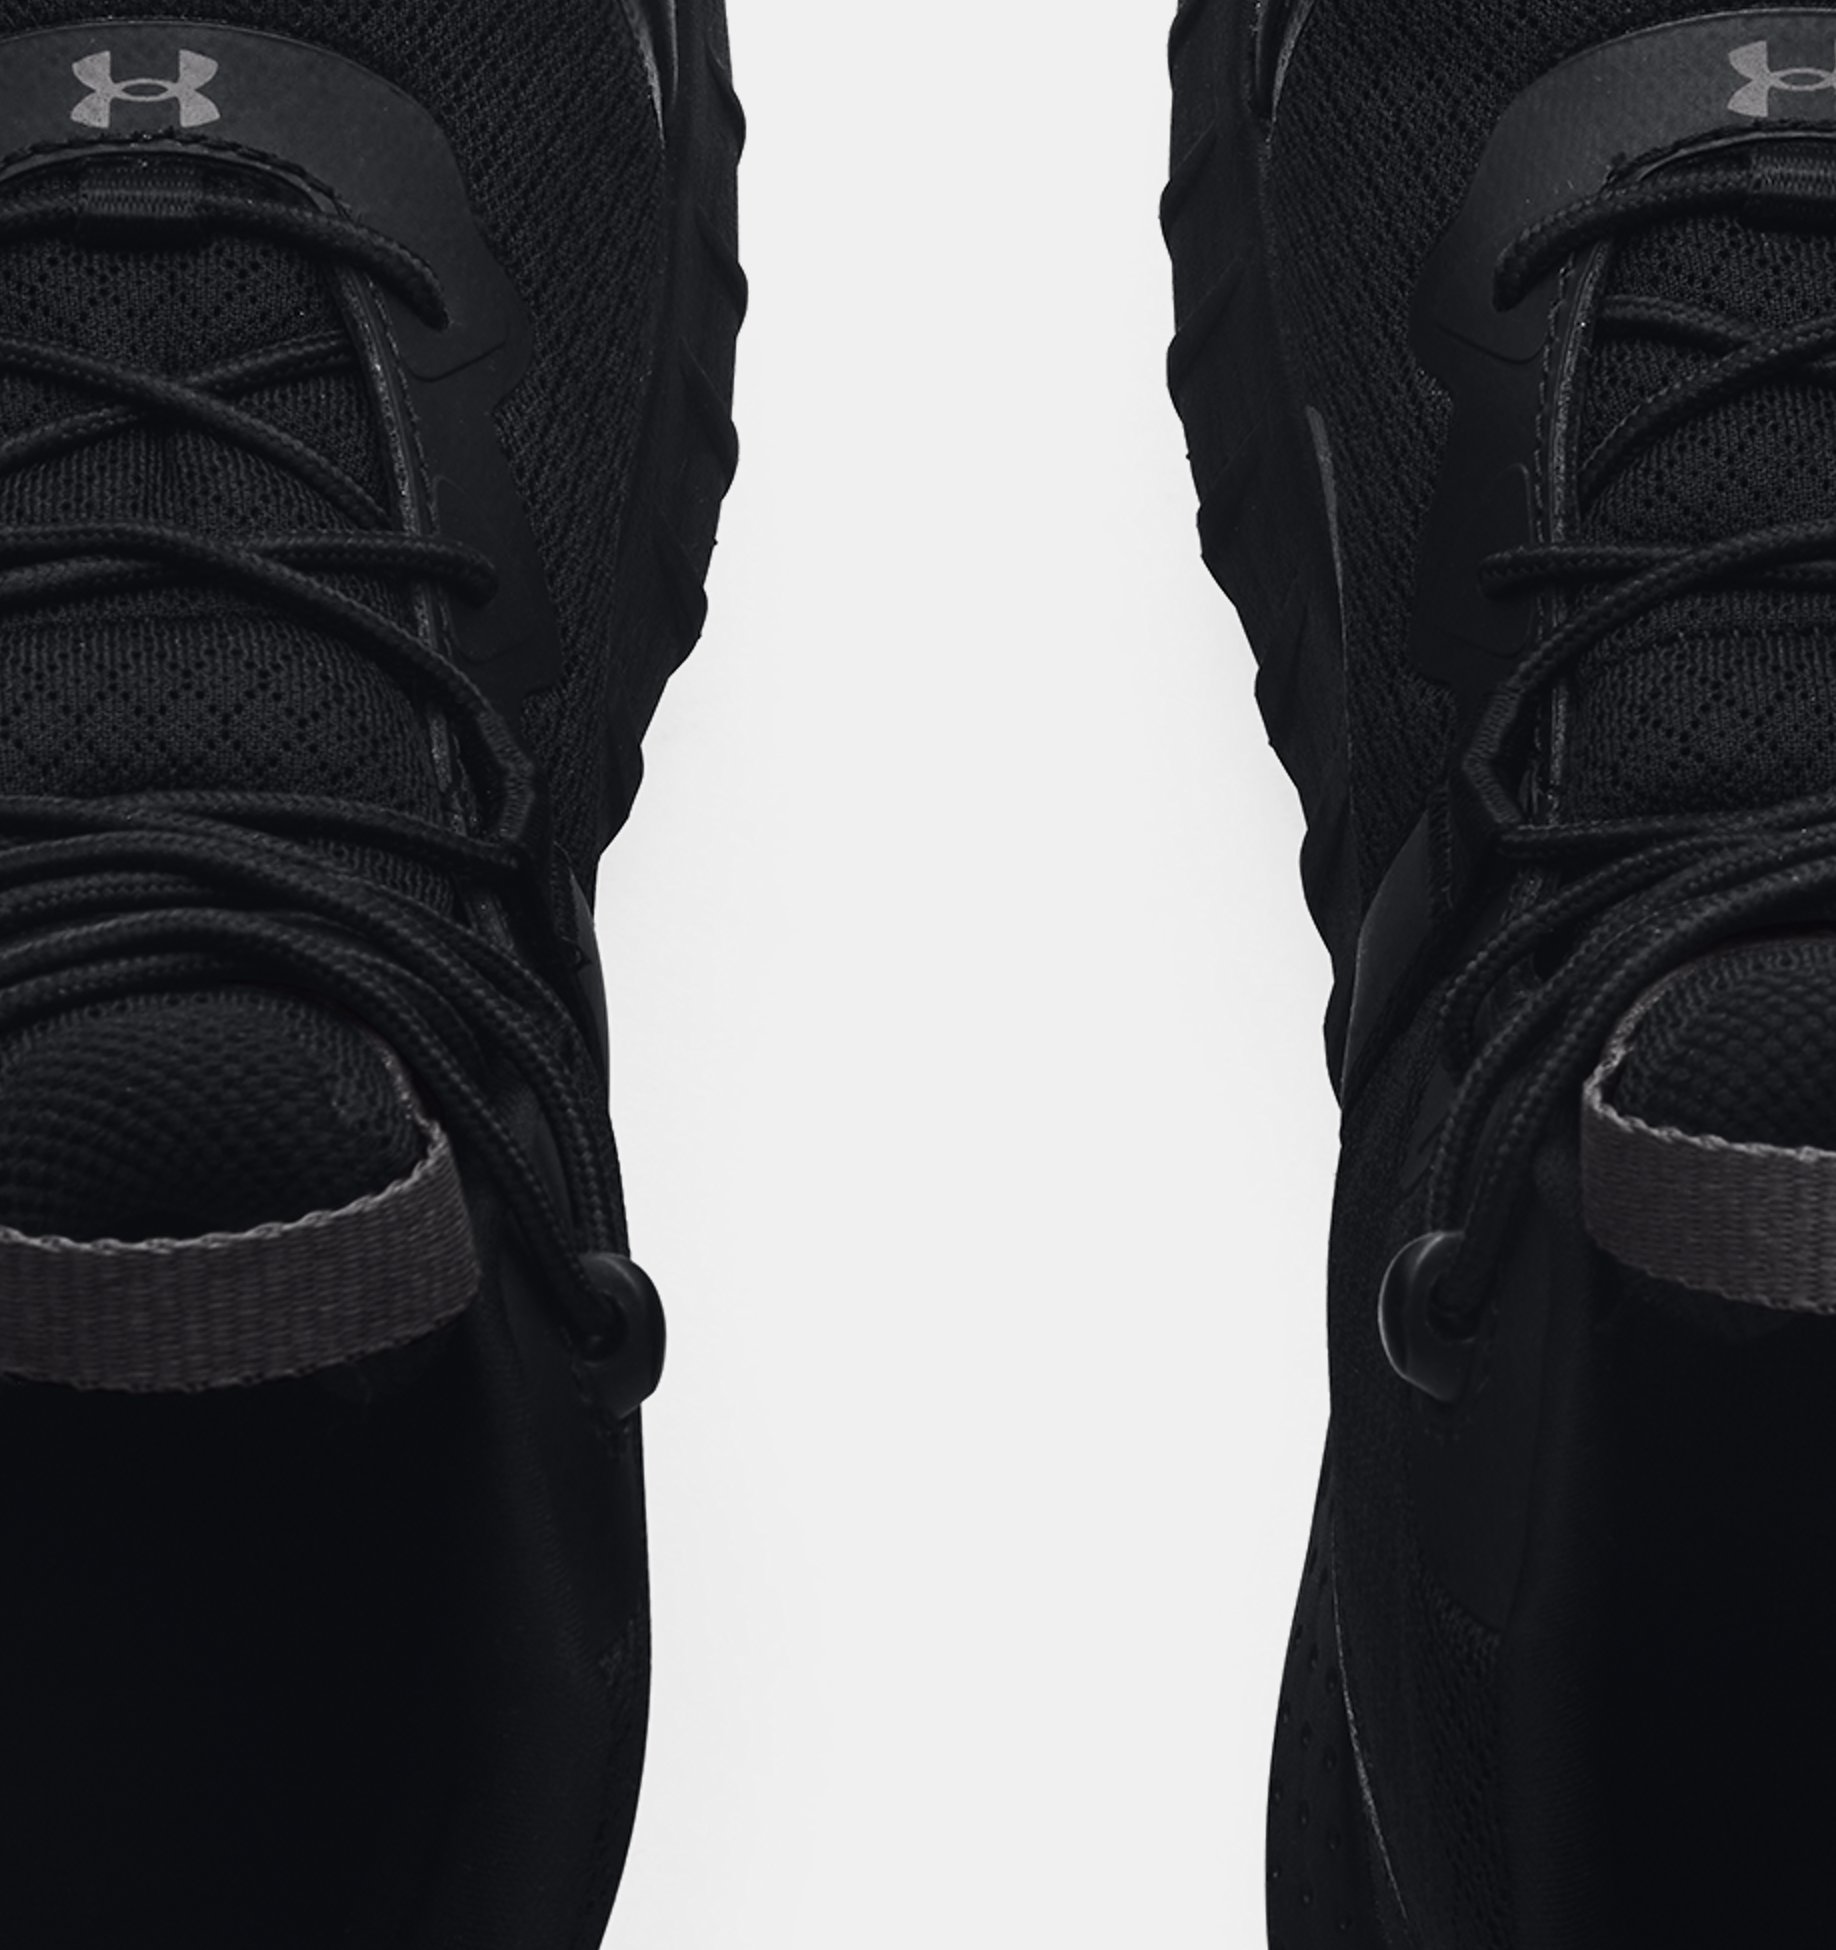 https://underarmour.scene7.com/is/image/Underarmour/3023742-001_TOE?rp=standard-30pad|pdpZoomDesktop&scl=0.50&fmt=jpg&qlt=85&resMode=sharp2&cache=on,on&bgc=f0f0f0&wid=1836&hei=1950&size=850,850